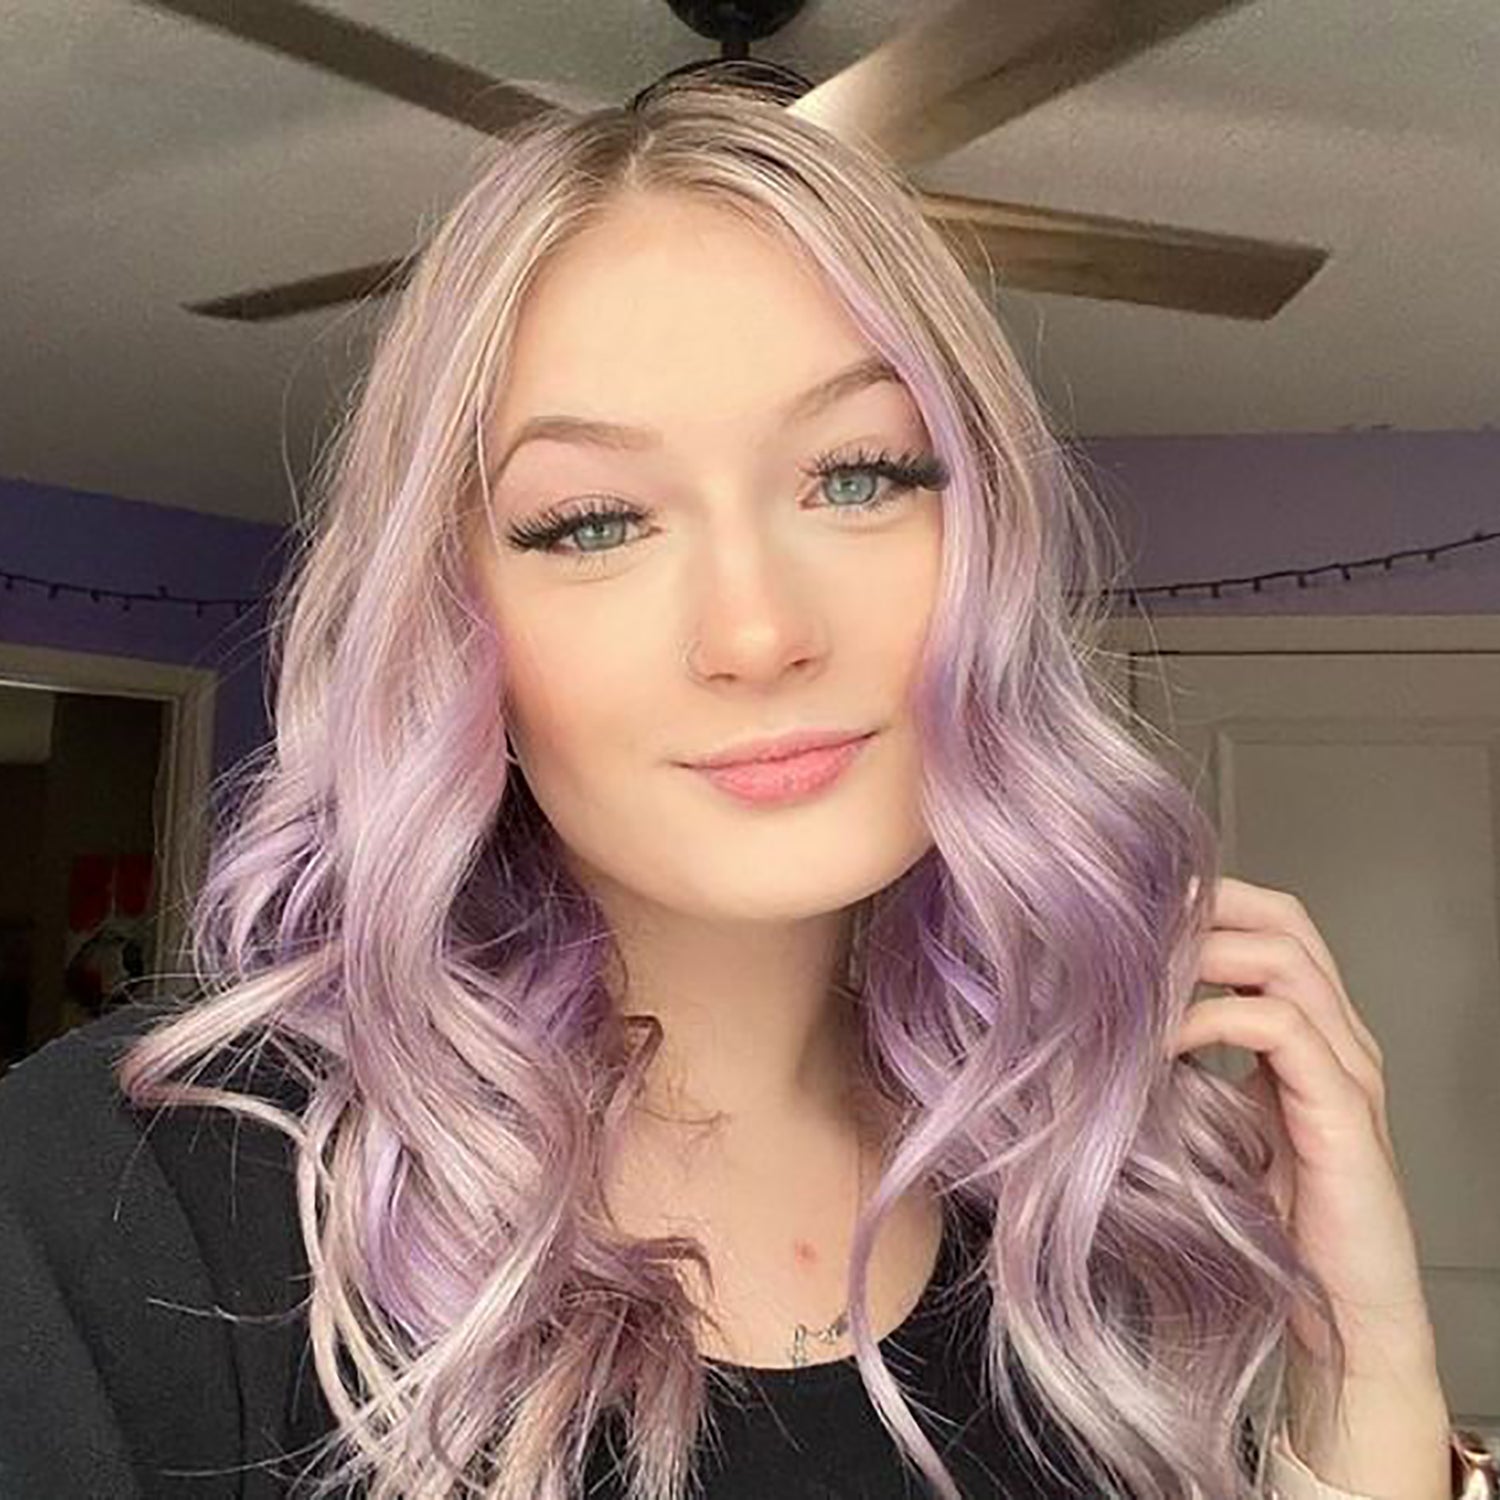 Amazon.com : MANIC PANIC Velvet Violet Hair Dye - Creamtone Pastel Perfect  - Semi Permanent Hair Color - Pastel Orchid Shade With Pink Undertones -  Vegan, PPD & Ammonia Free - For